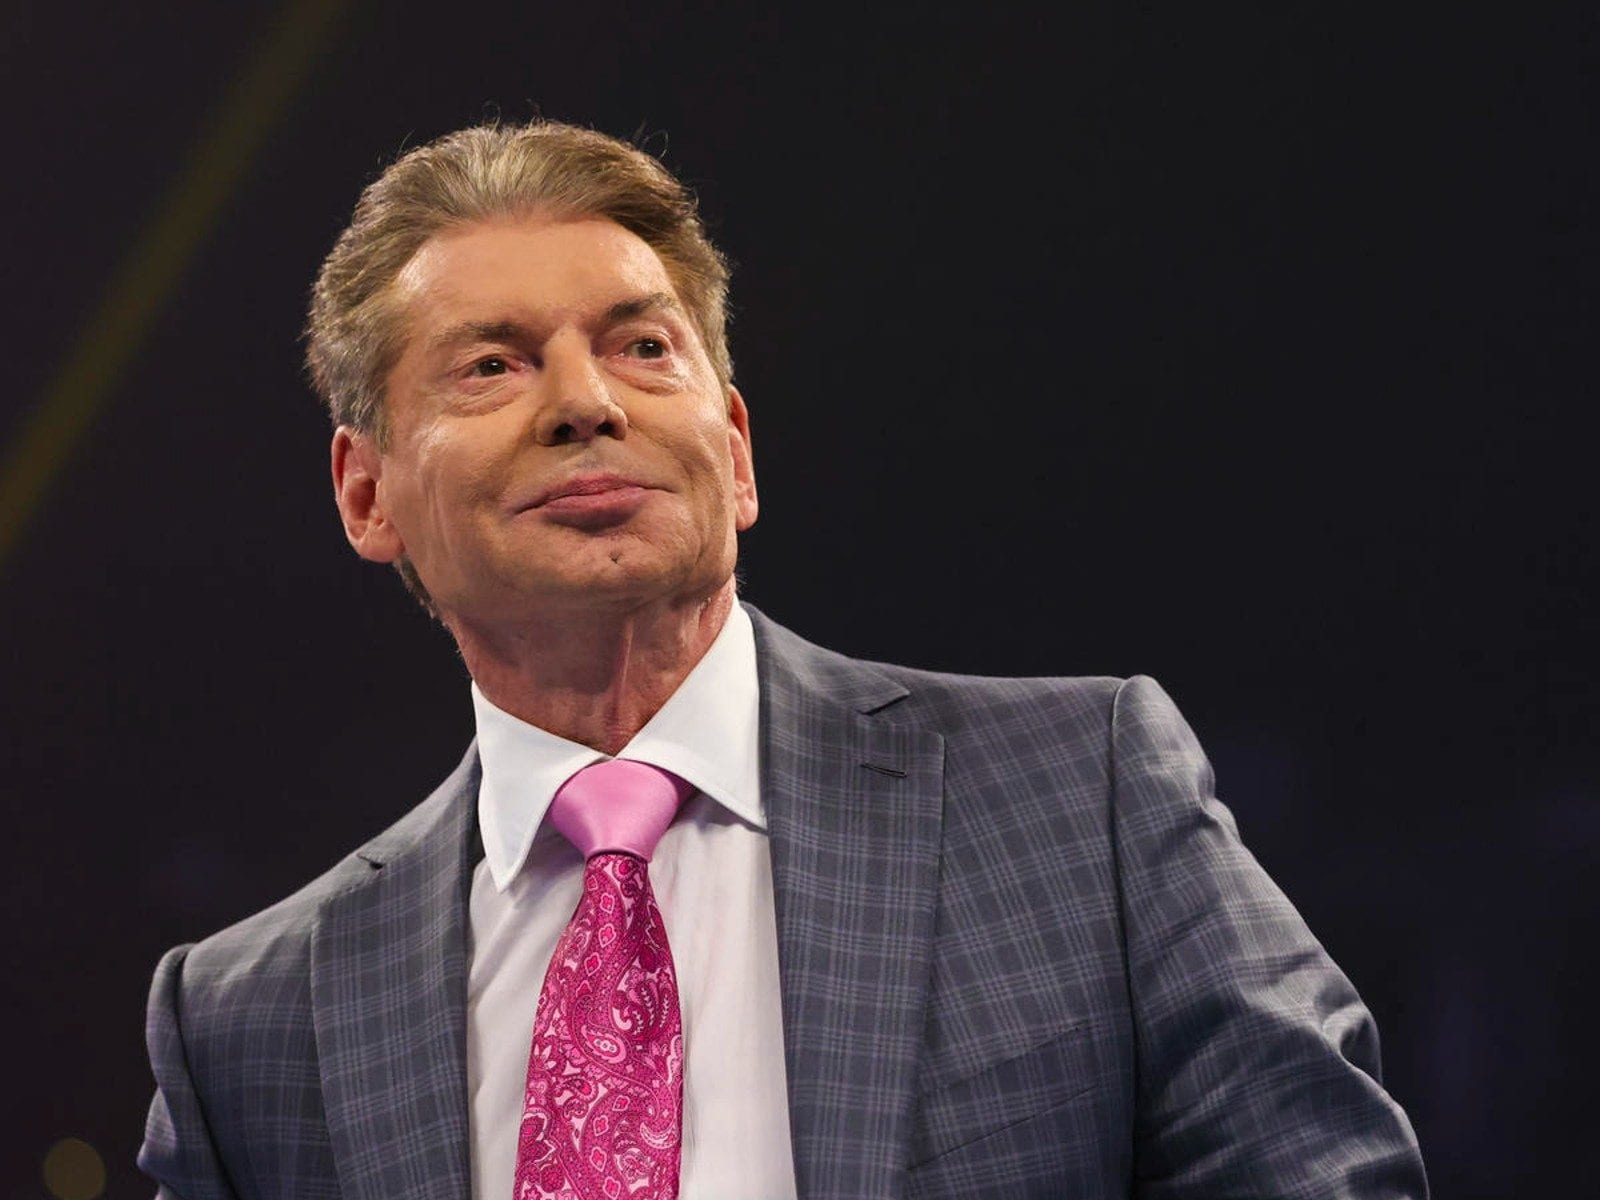 WWE's Vince McMahon Says he is Retiring Amid Misconduct Probe - News18